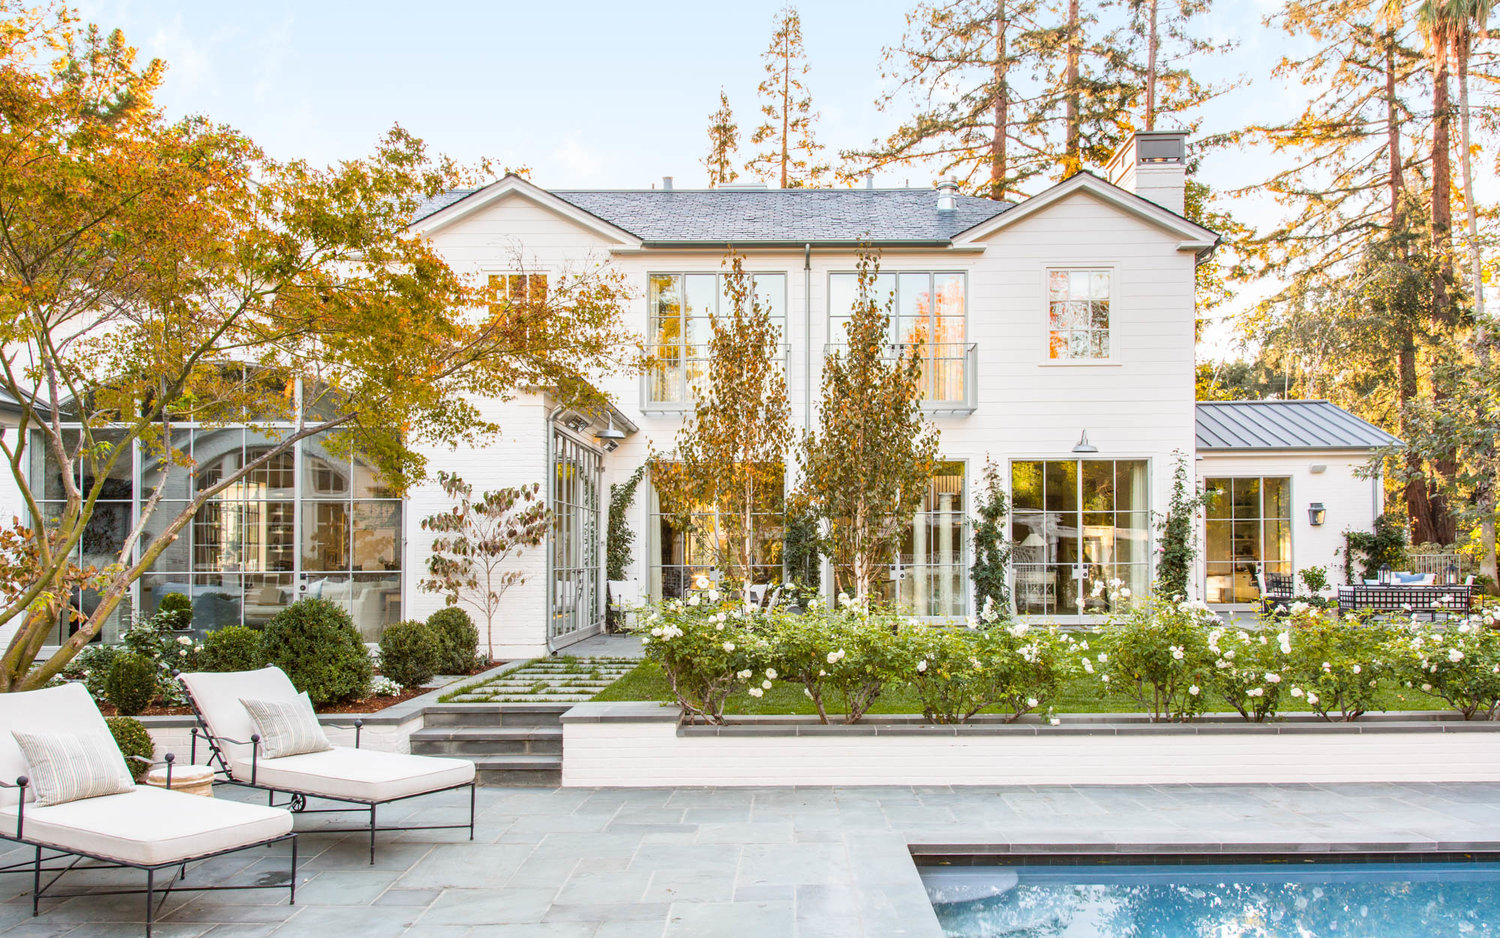 Exterior at the Barnett residence in Atherton, CA.  Architecture and interior design by Brooke and Steve Giannetti.